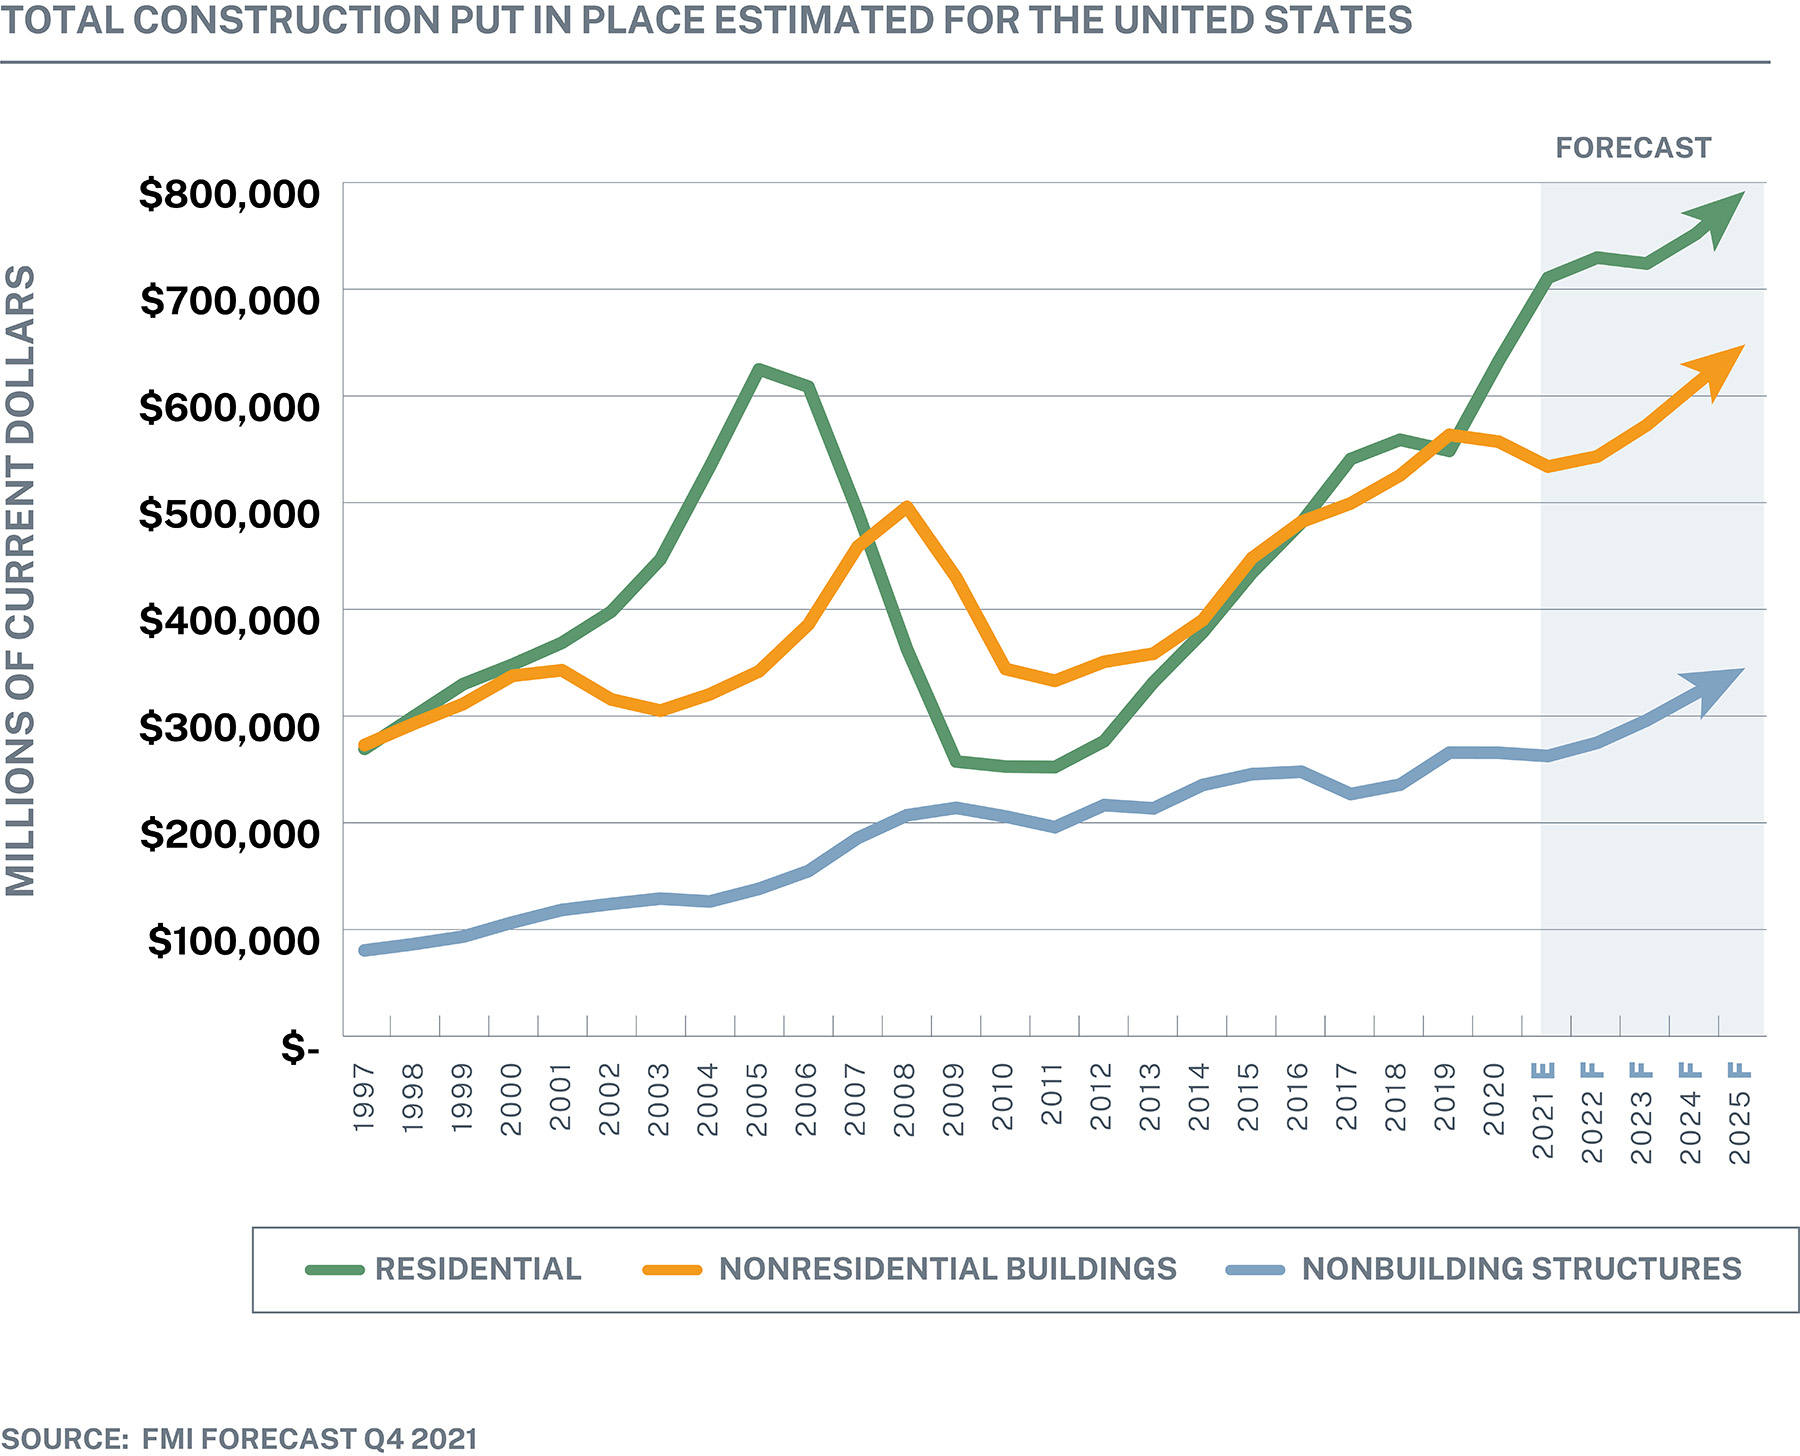 chart showing the estimated total construction put in place for residential, nonresidential buildings, and nonbuilding structures in the united states from 1997 to 2025